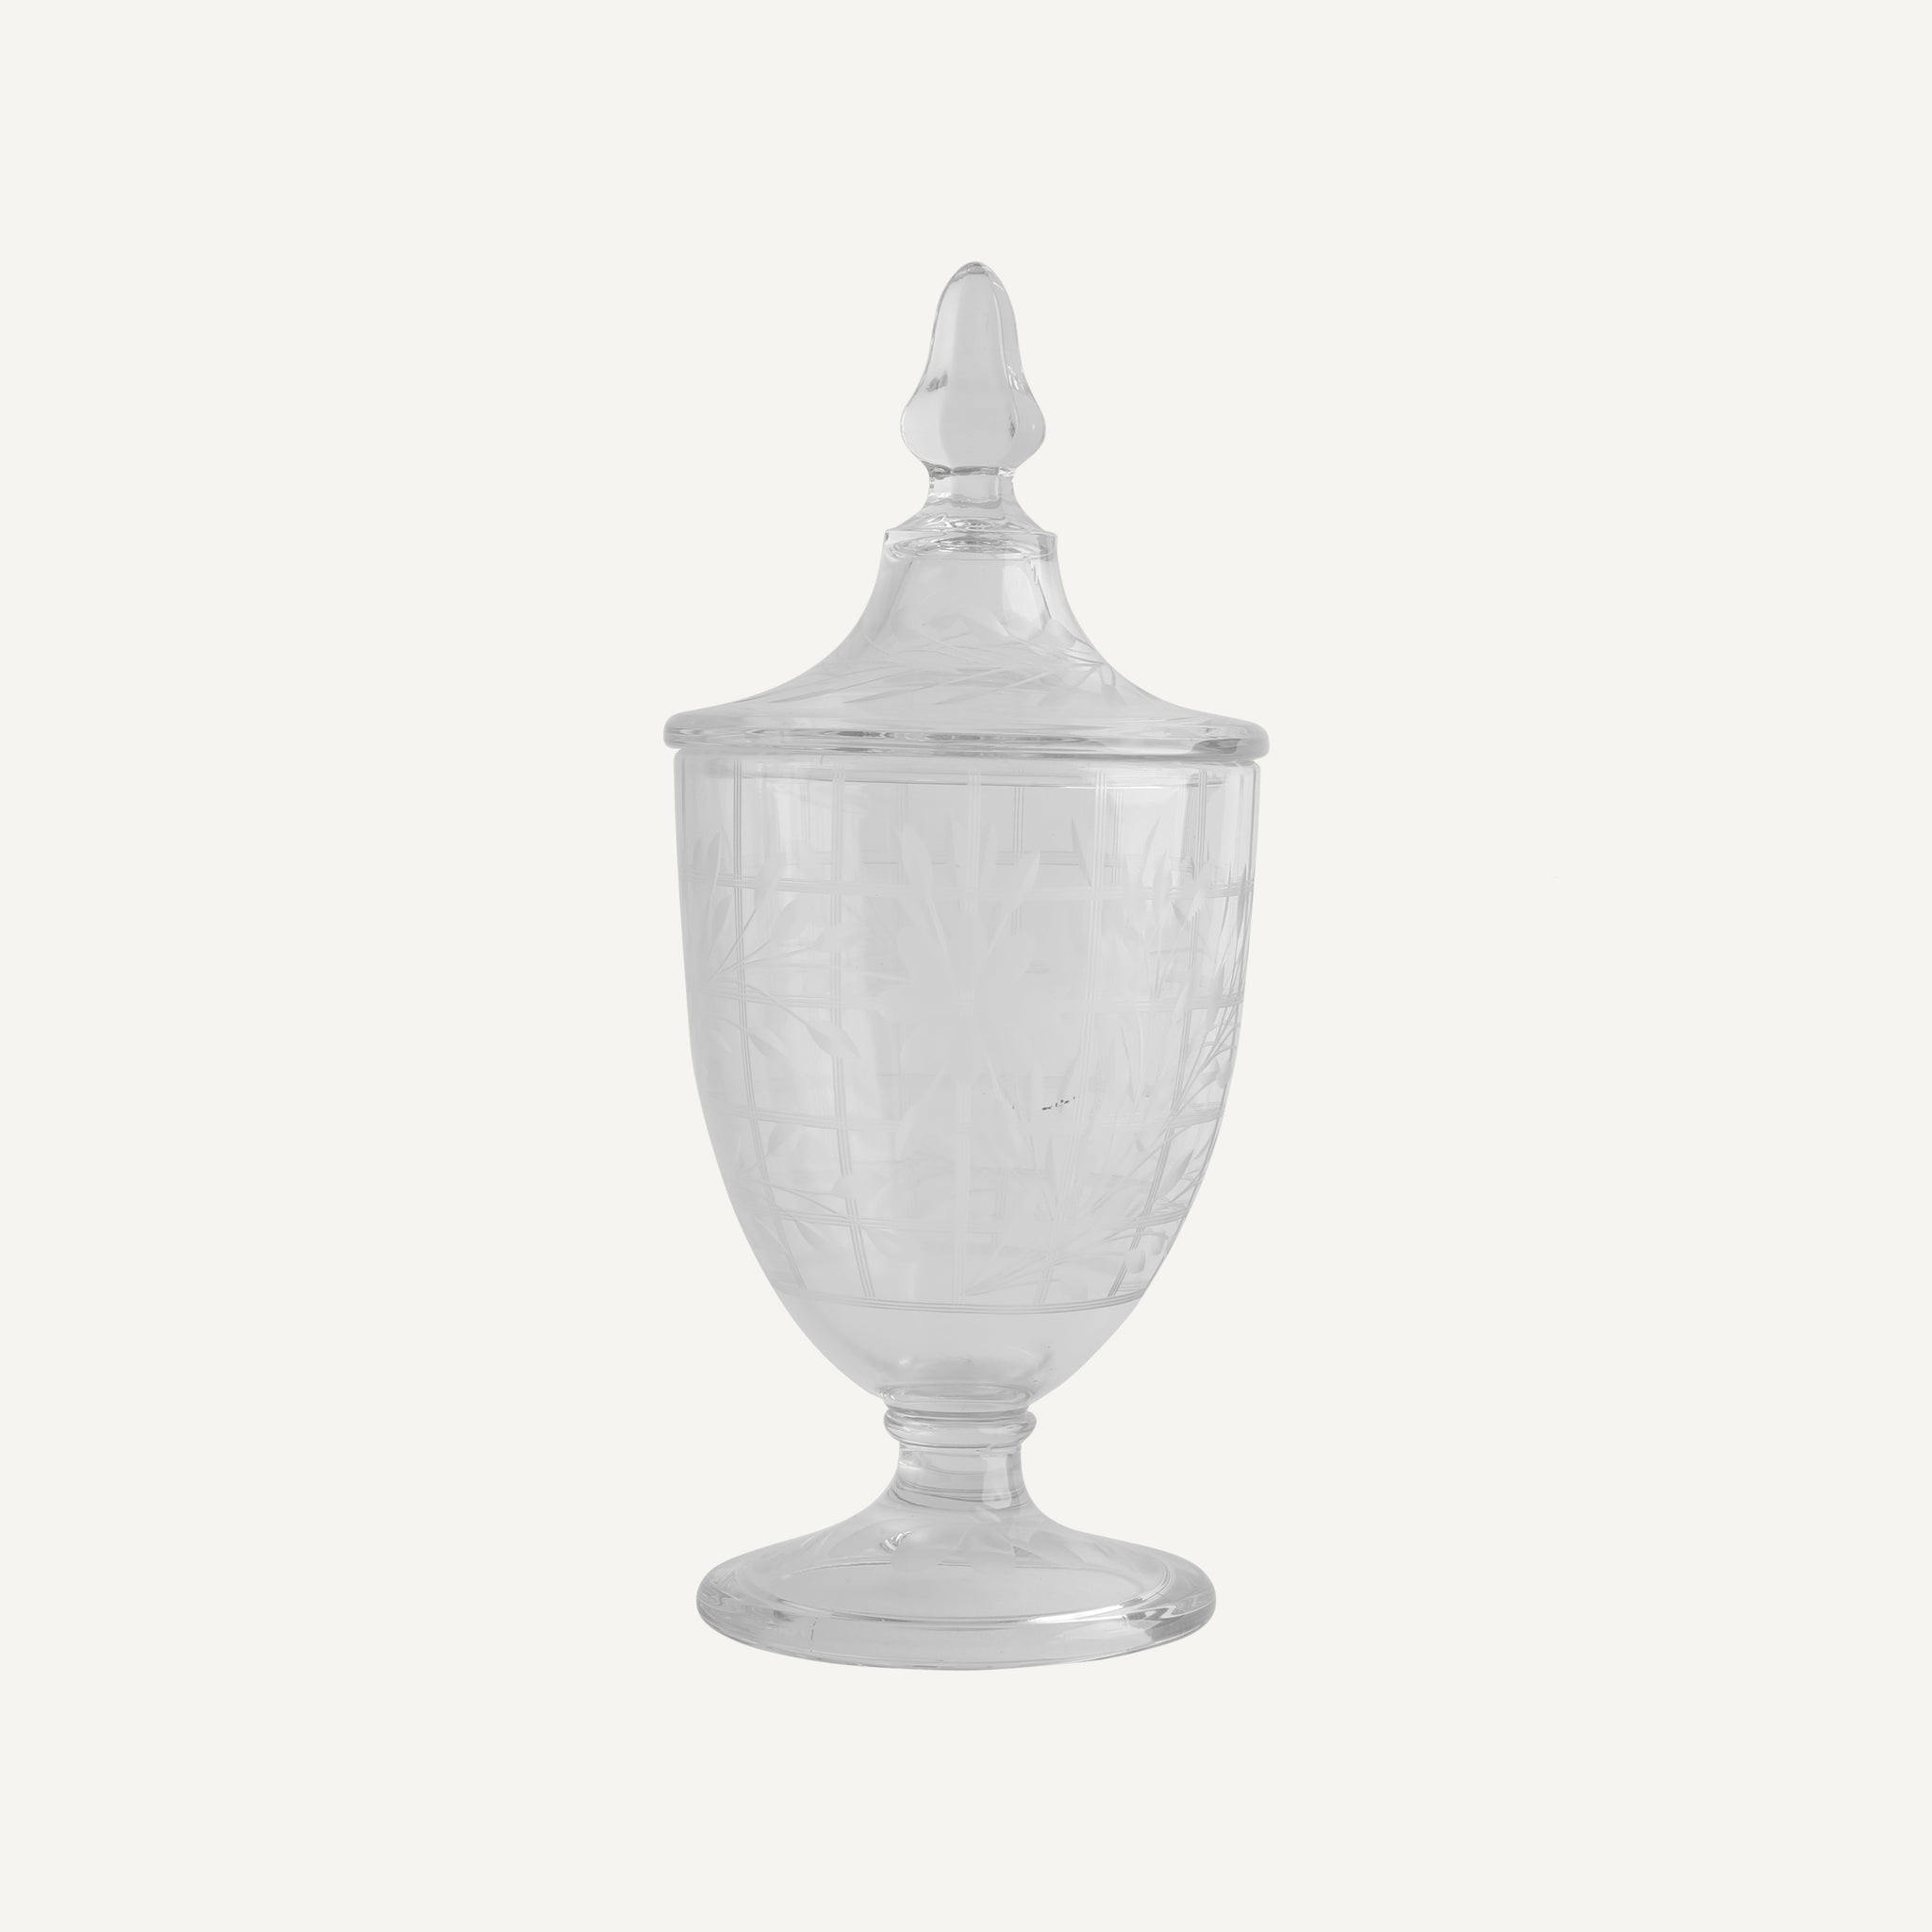 ANTIQUE GLASS LIDDED COMPOTE